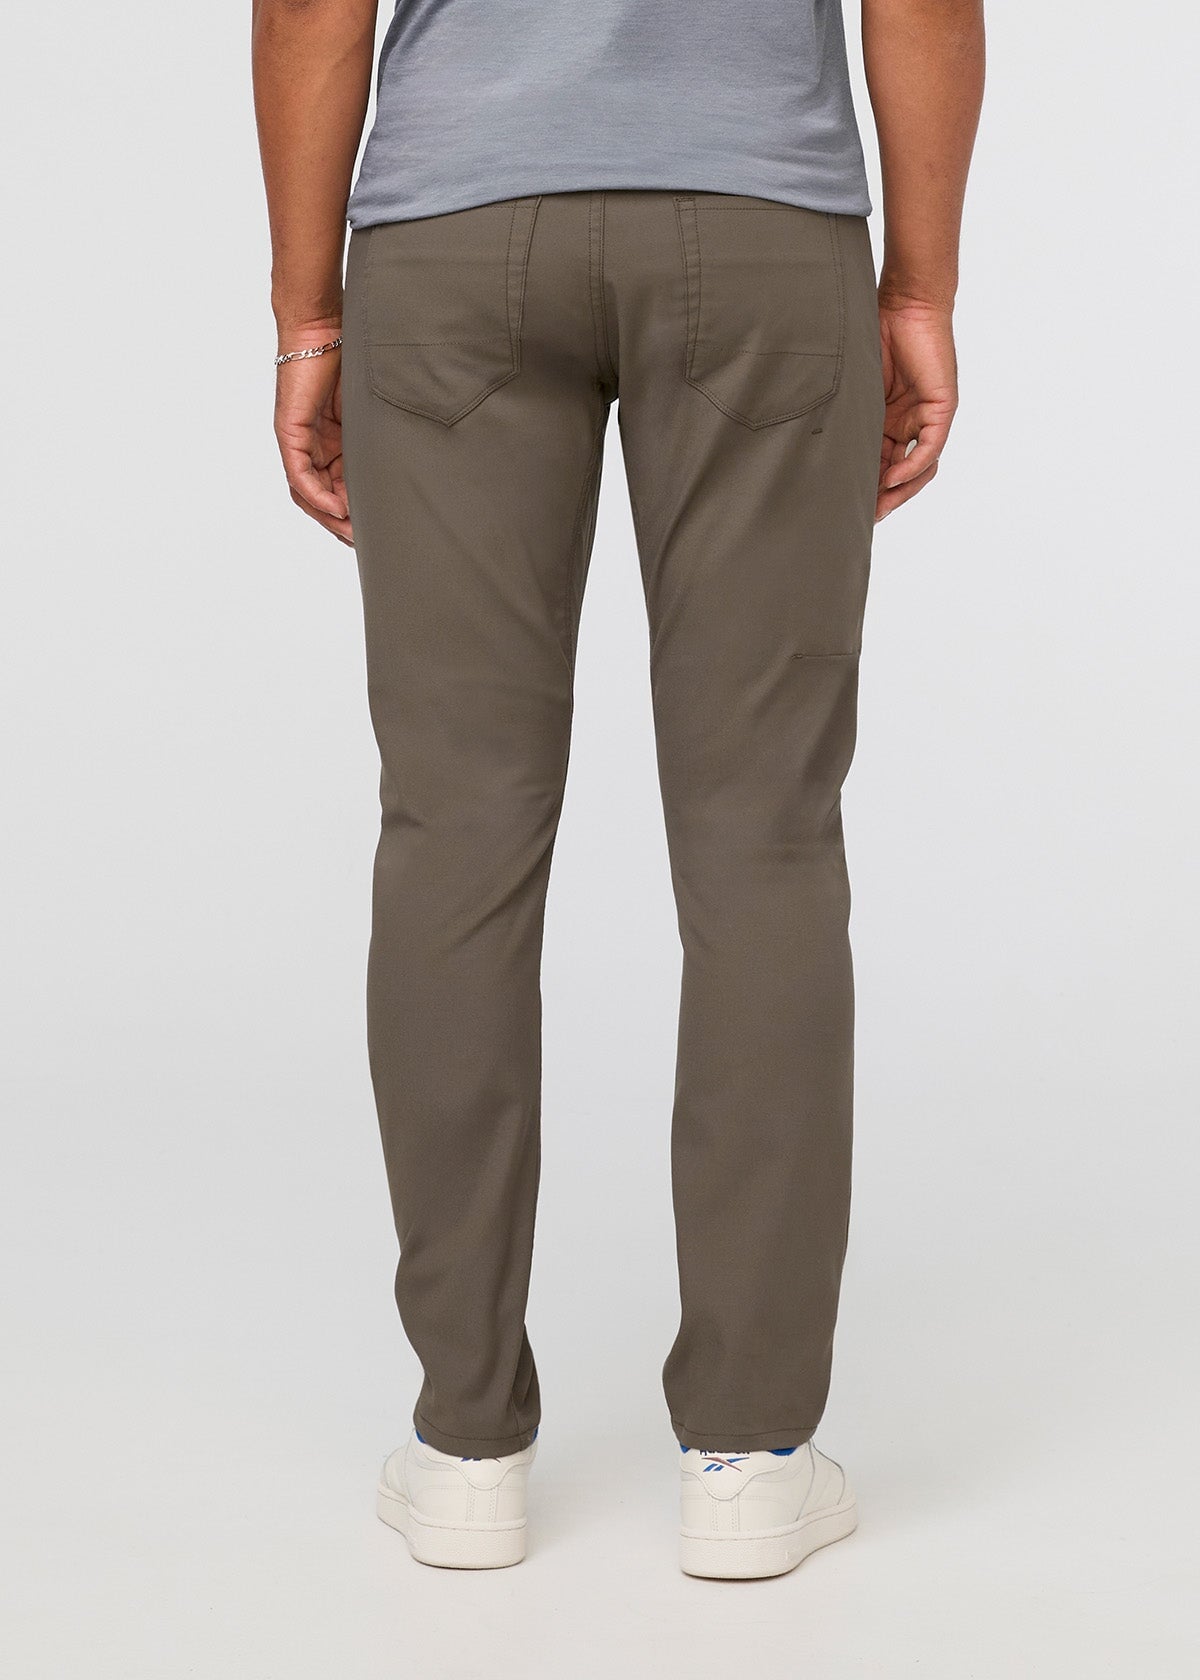 NuStretch Relaxed 5-Pocket - Thyme